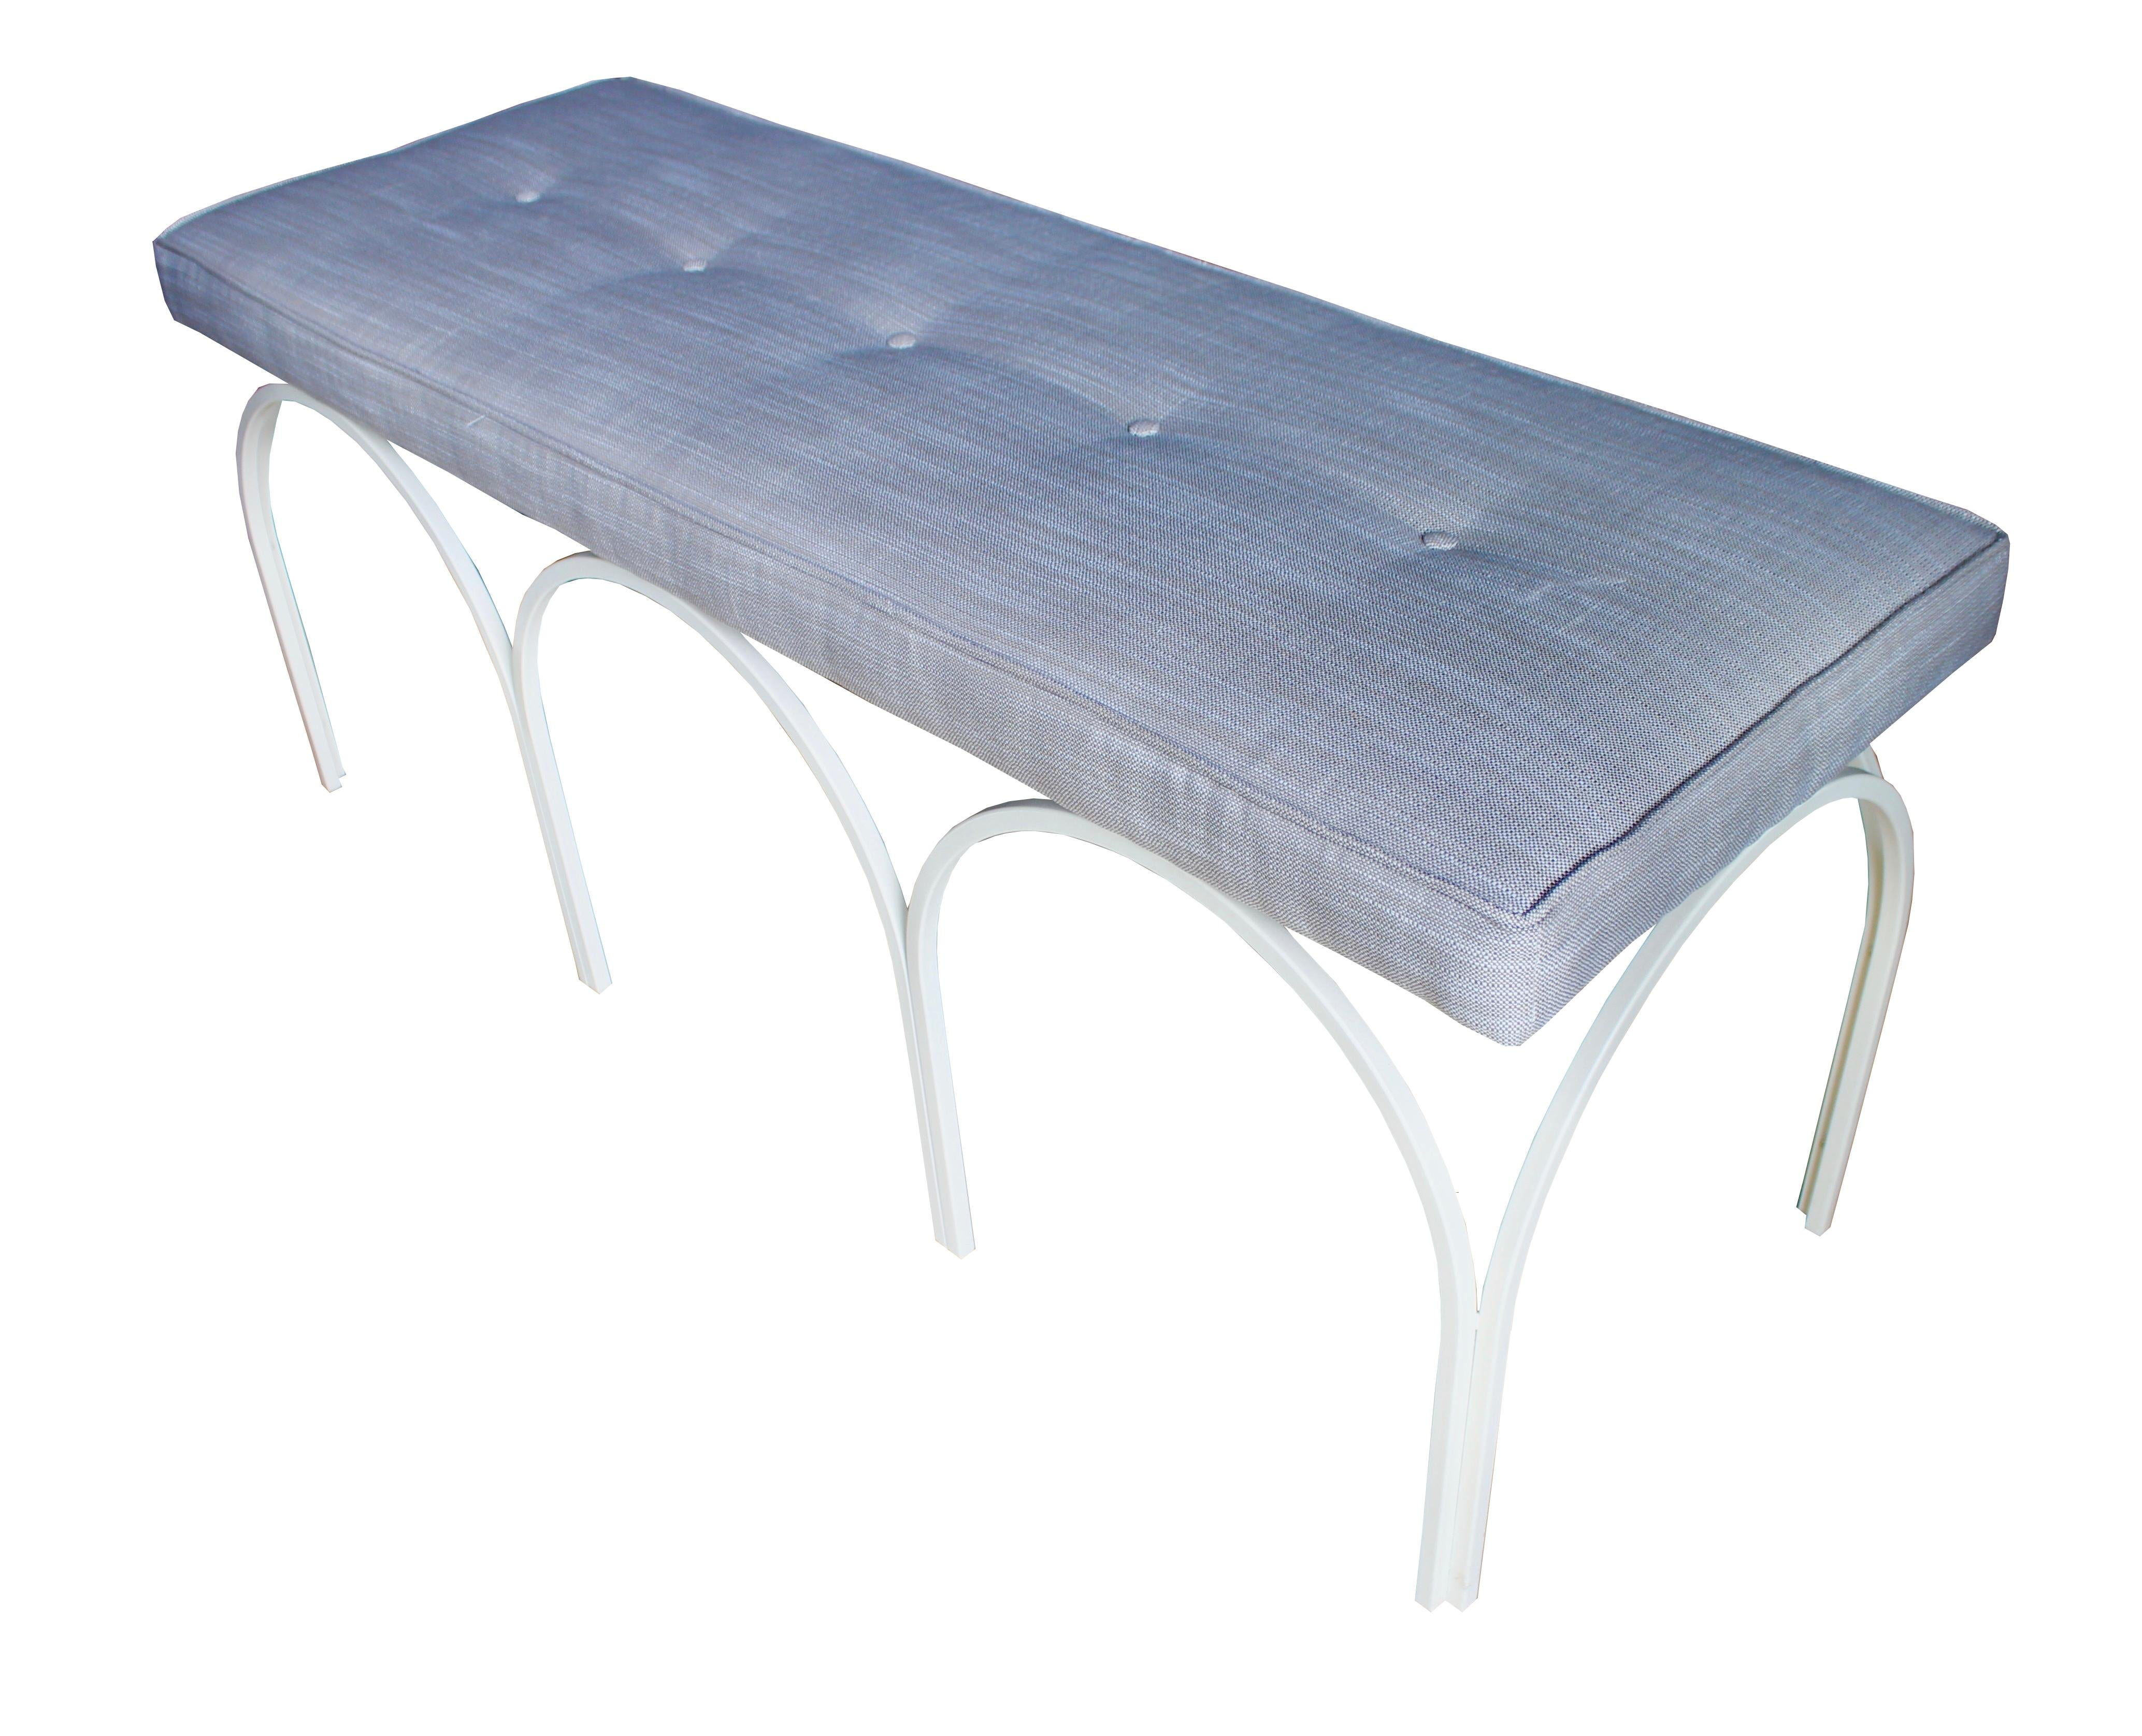 20th Century Mid-Century Modern Upholstered Bench by Industrial Artist Frederick Weinberg For Sale